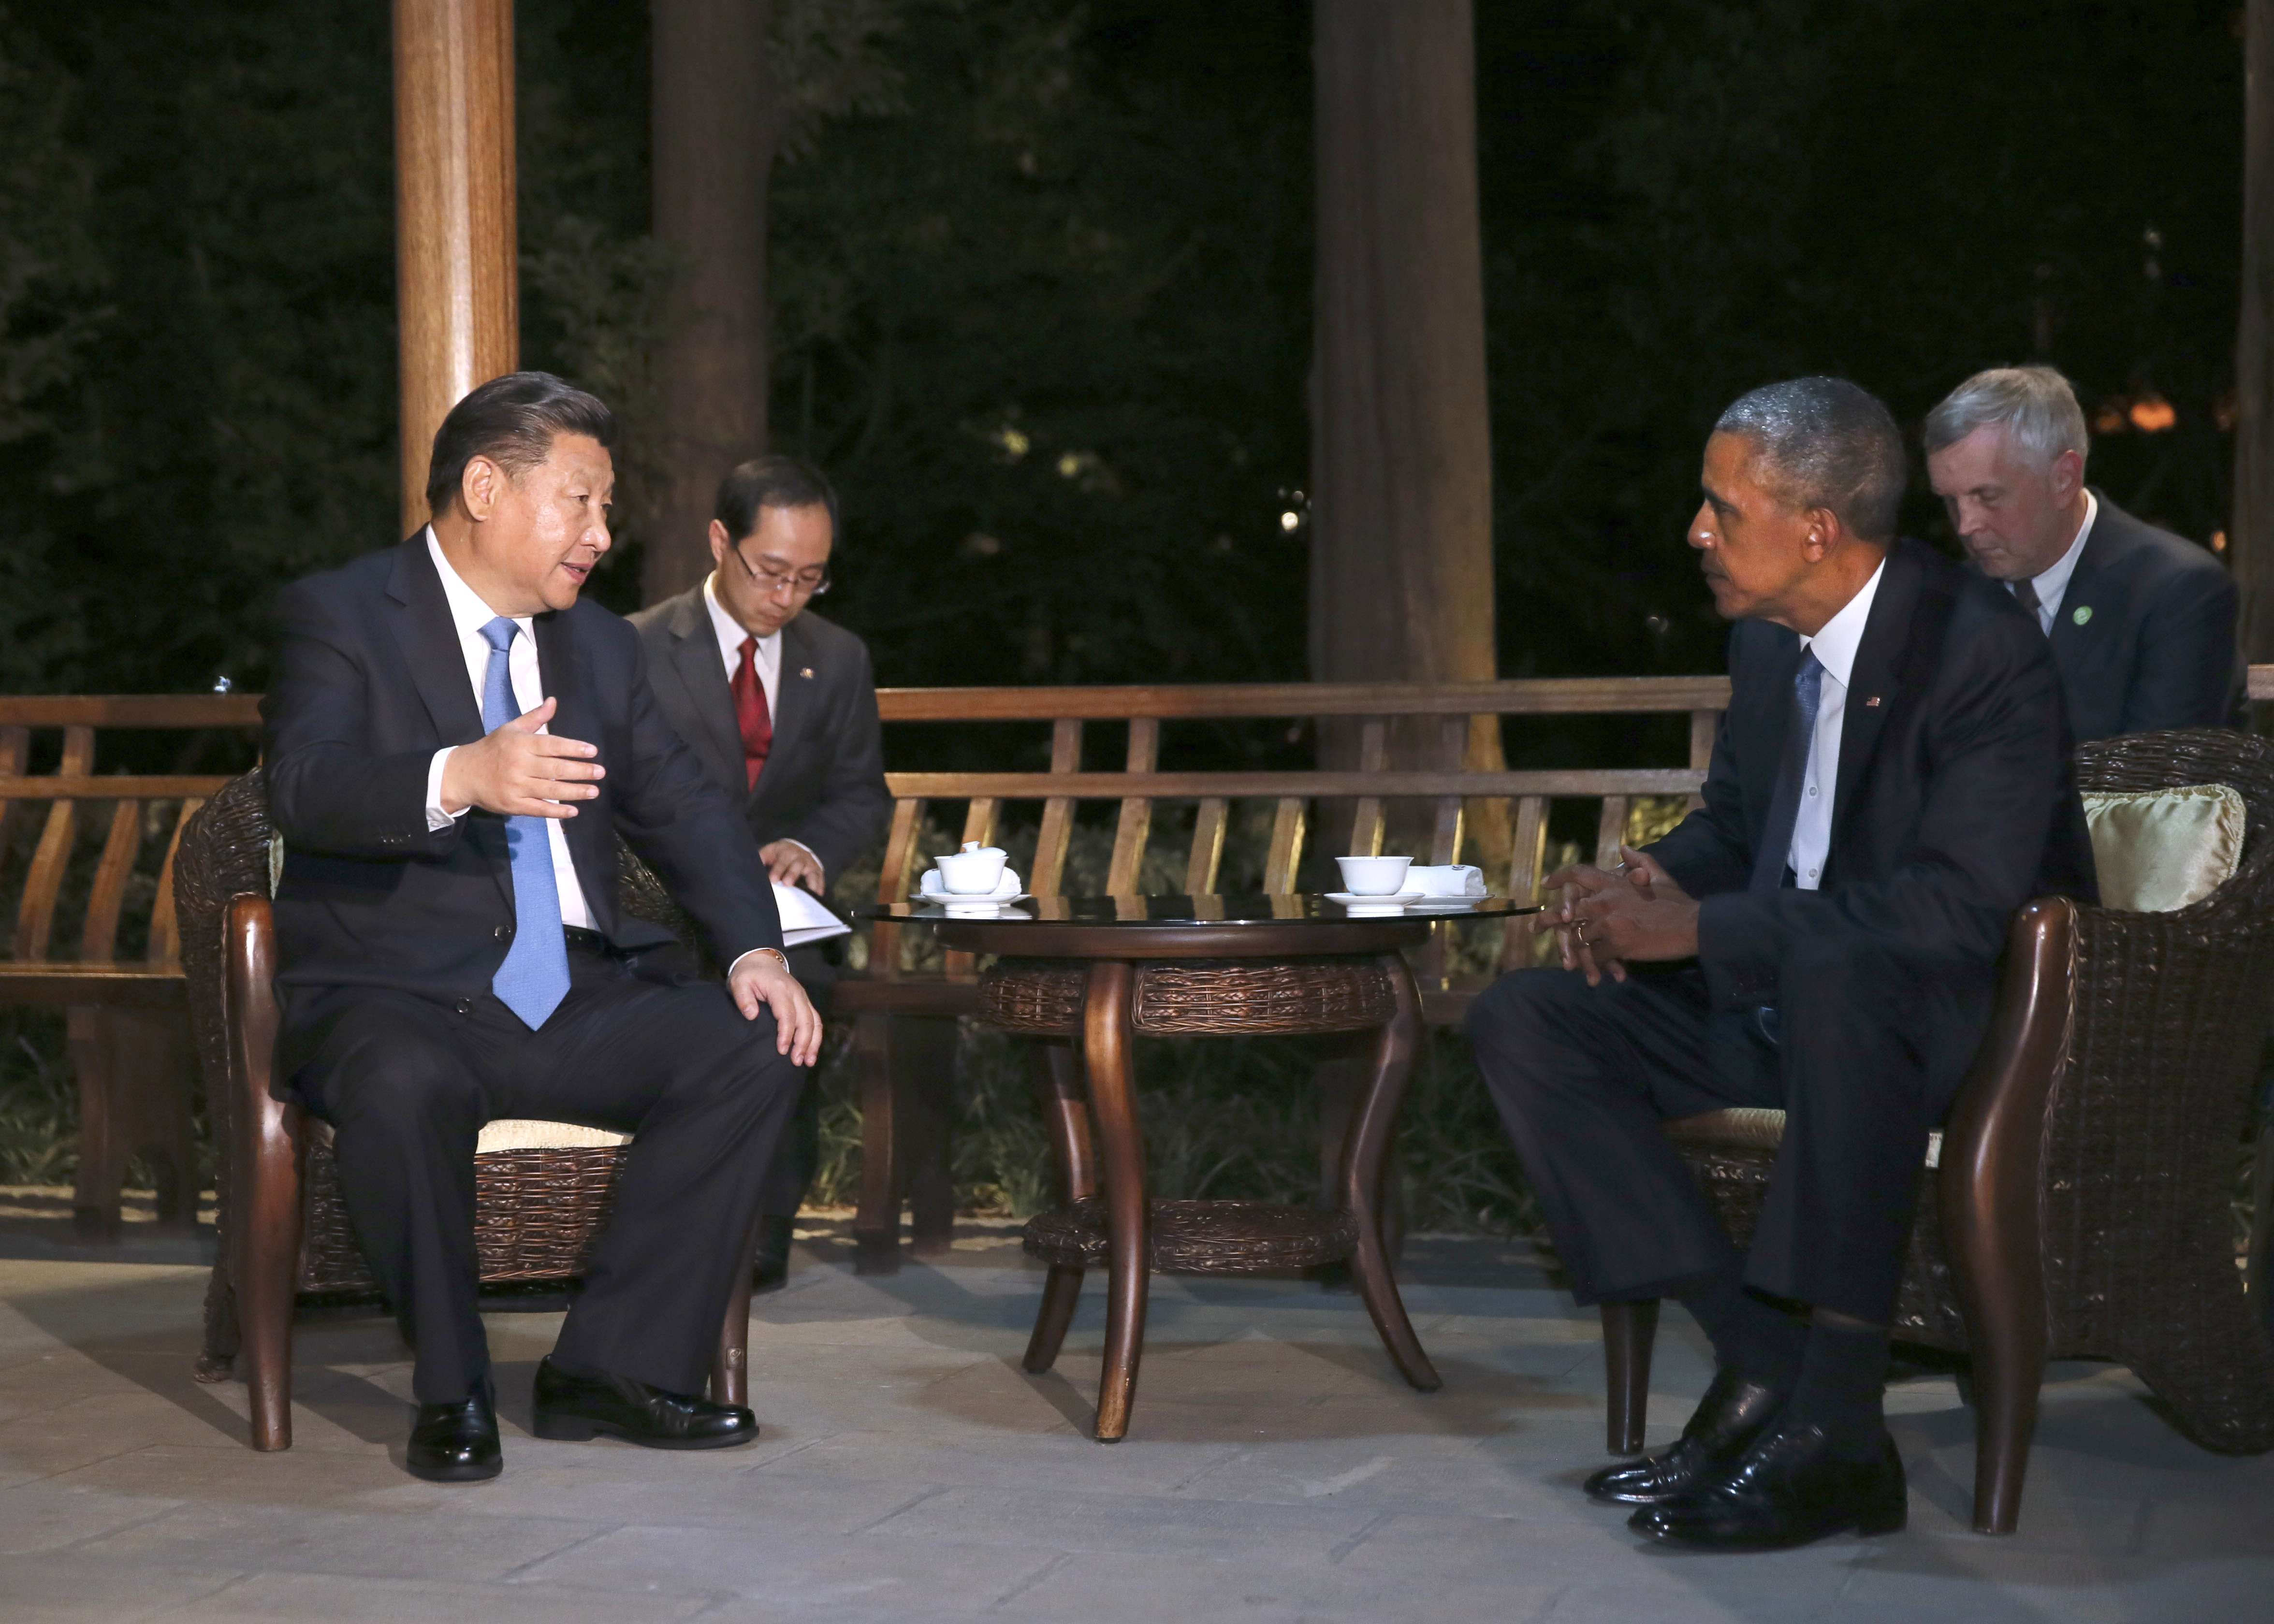 President Xi Jinping and his US counterpart Barack Obama agreed to disagree, according to observers. Photo: Xinhua